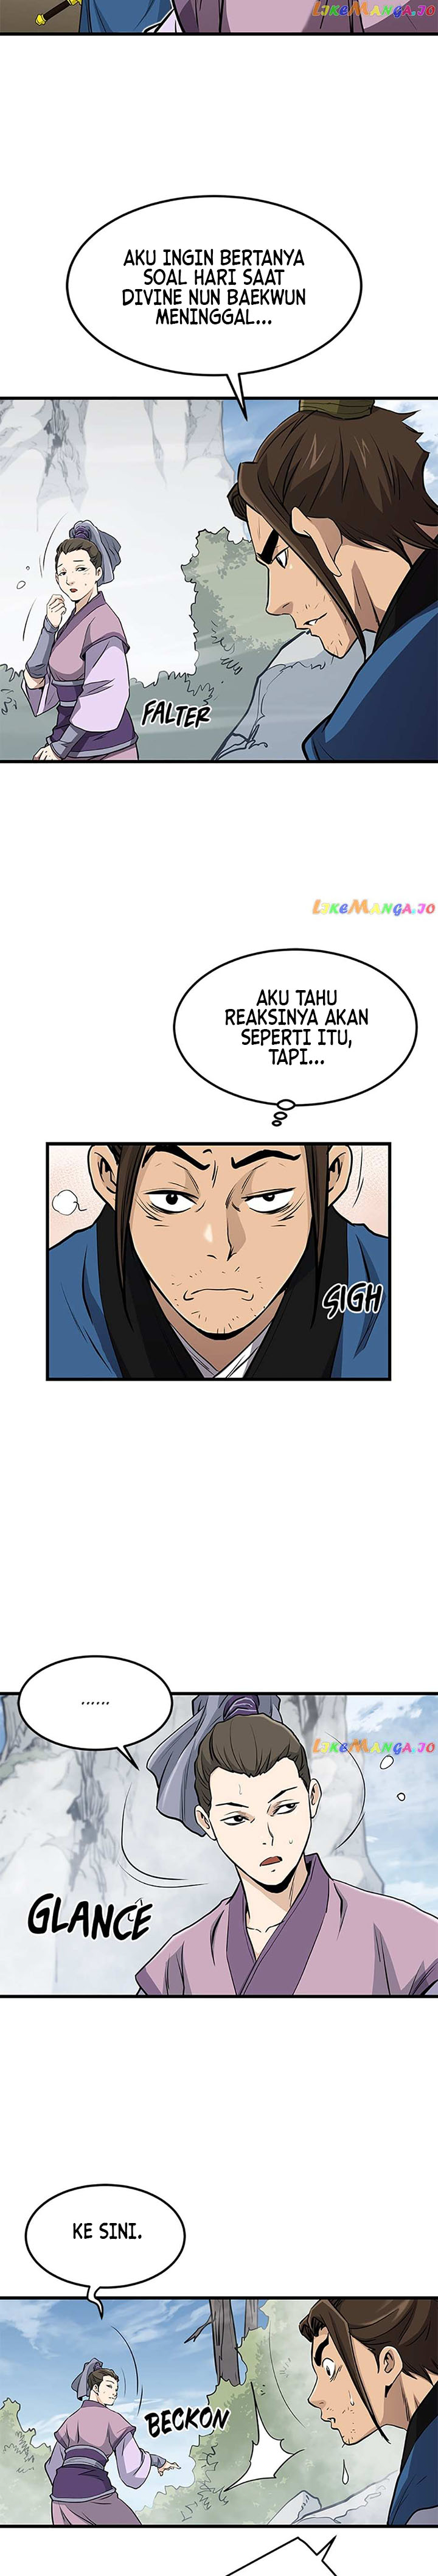 Grand General Chapter 83 Image 21